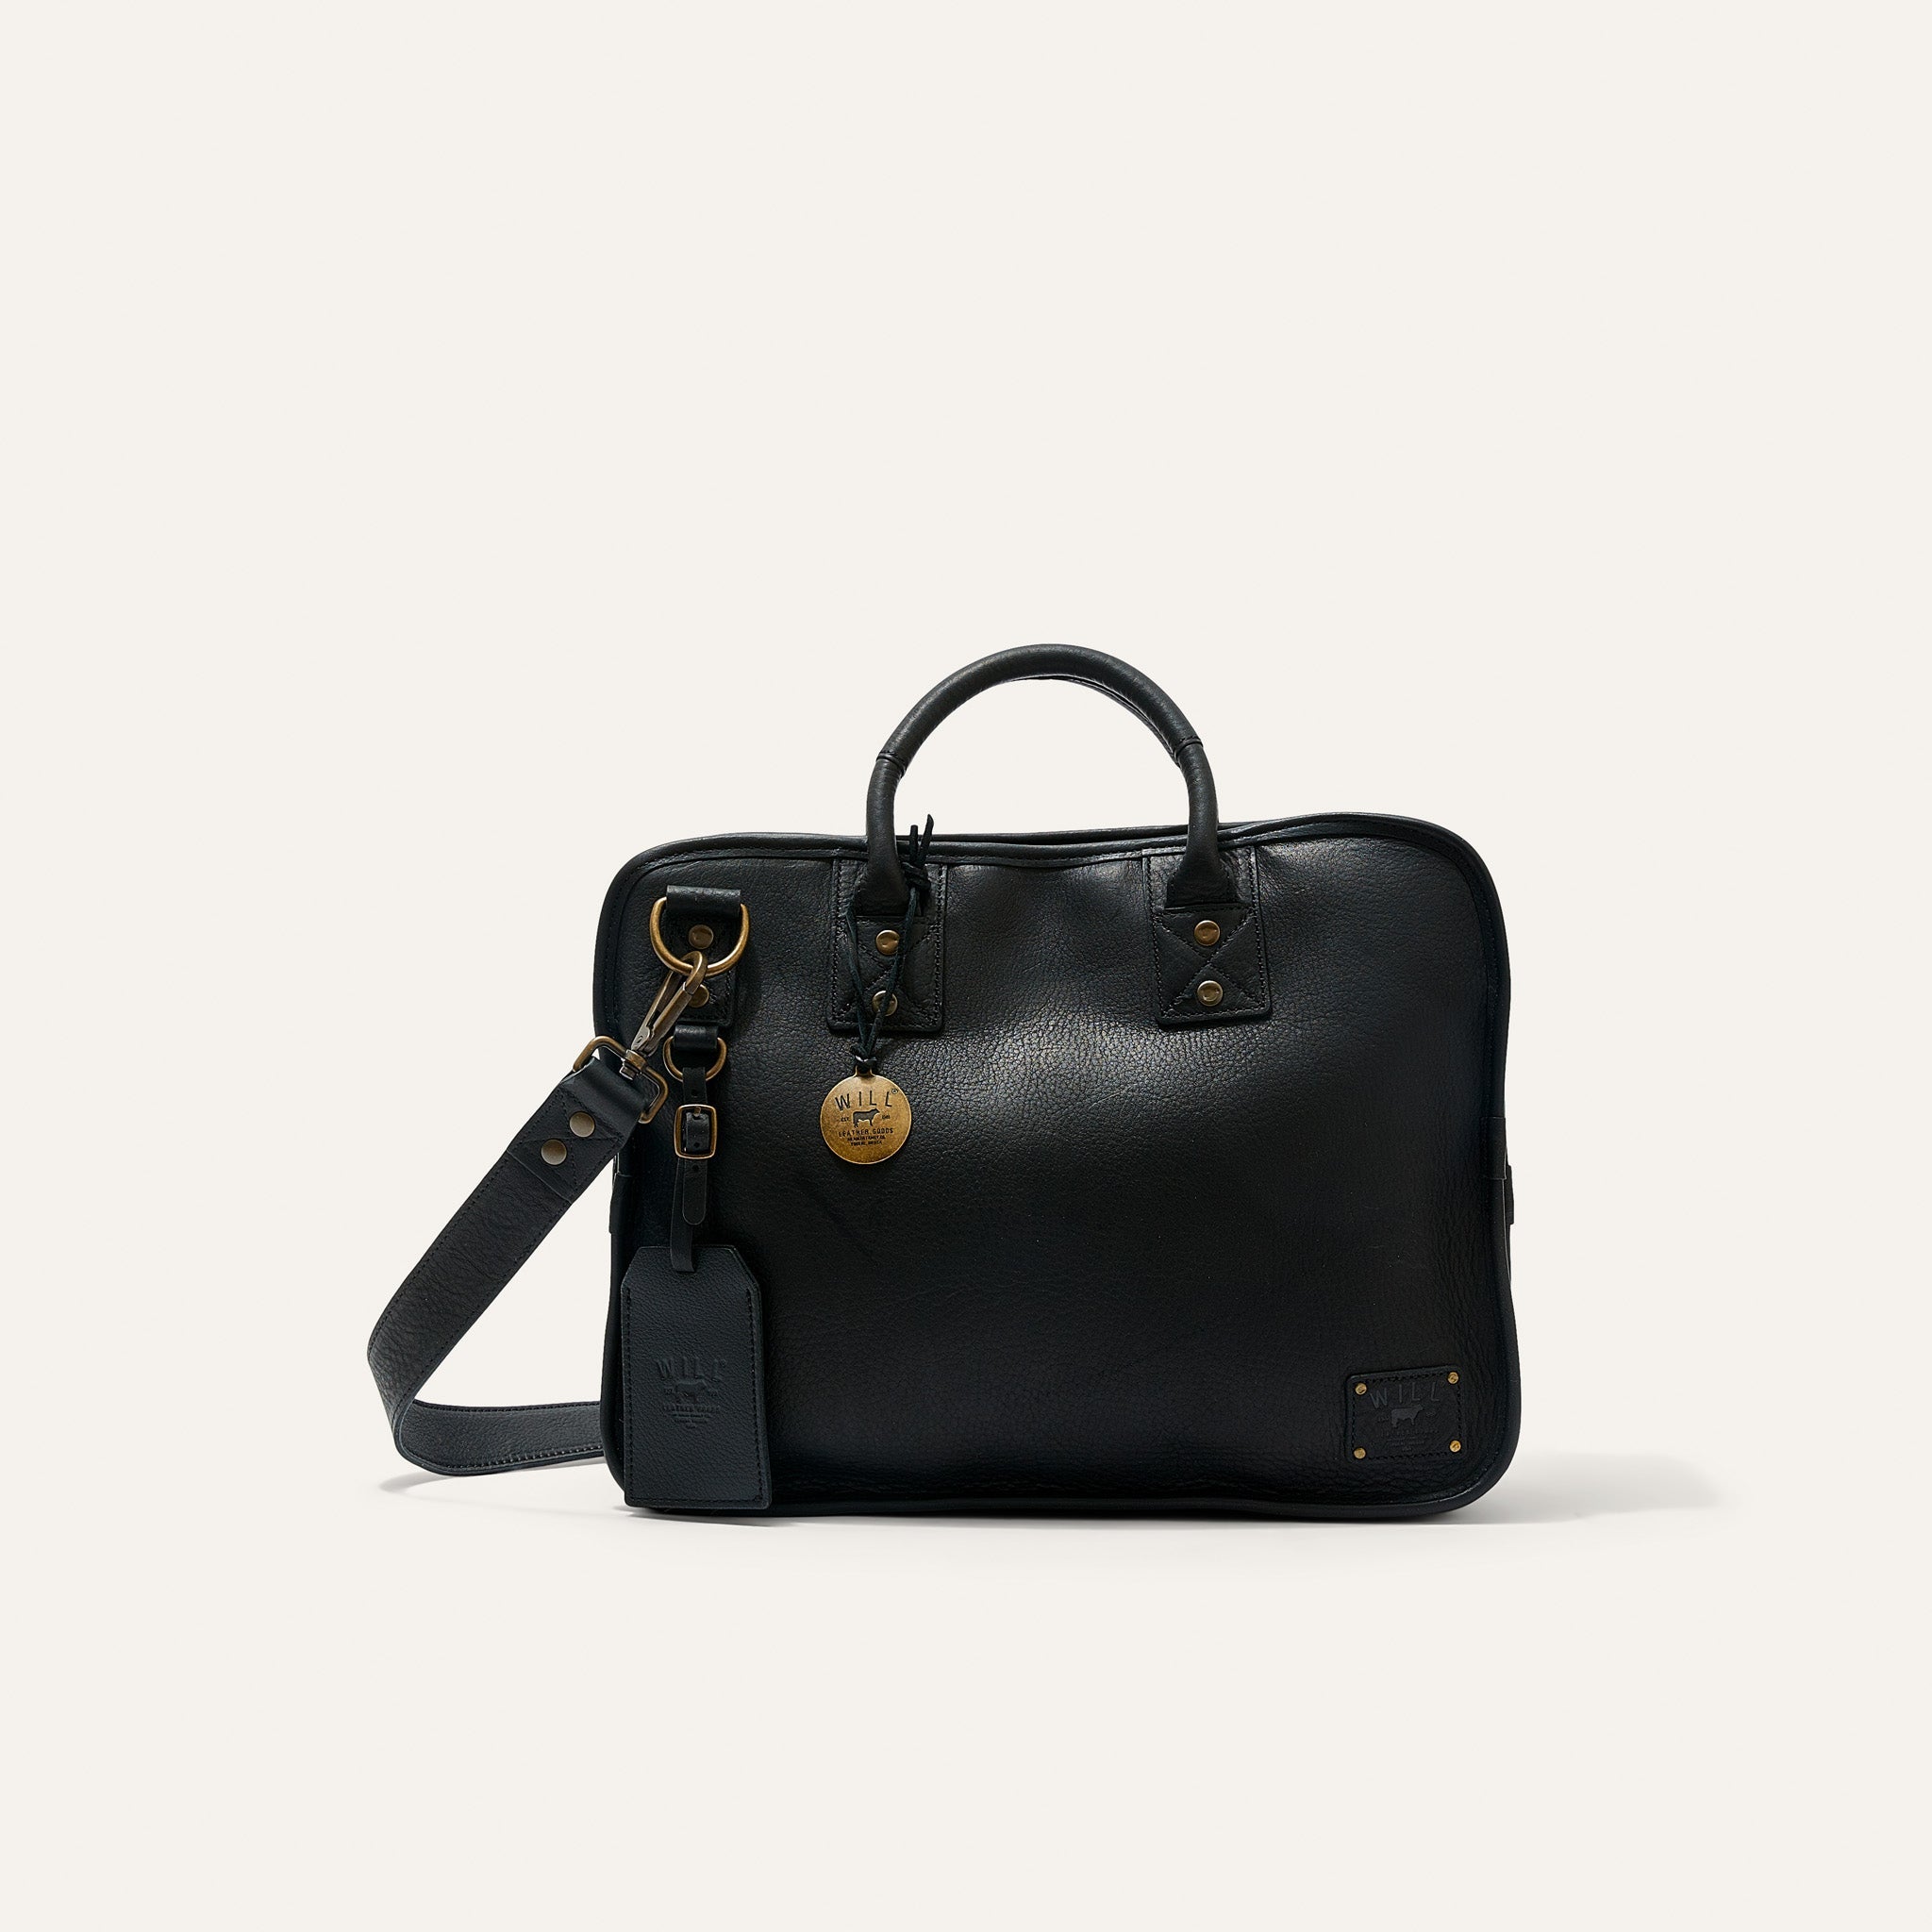 Hank Leather Satchel in Black by Will Goods - J. Men's Clothing